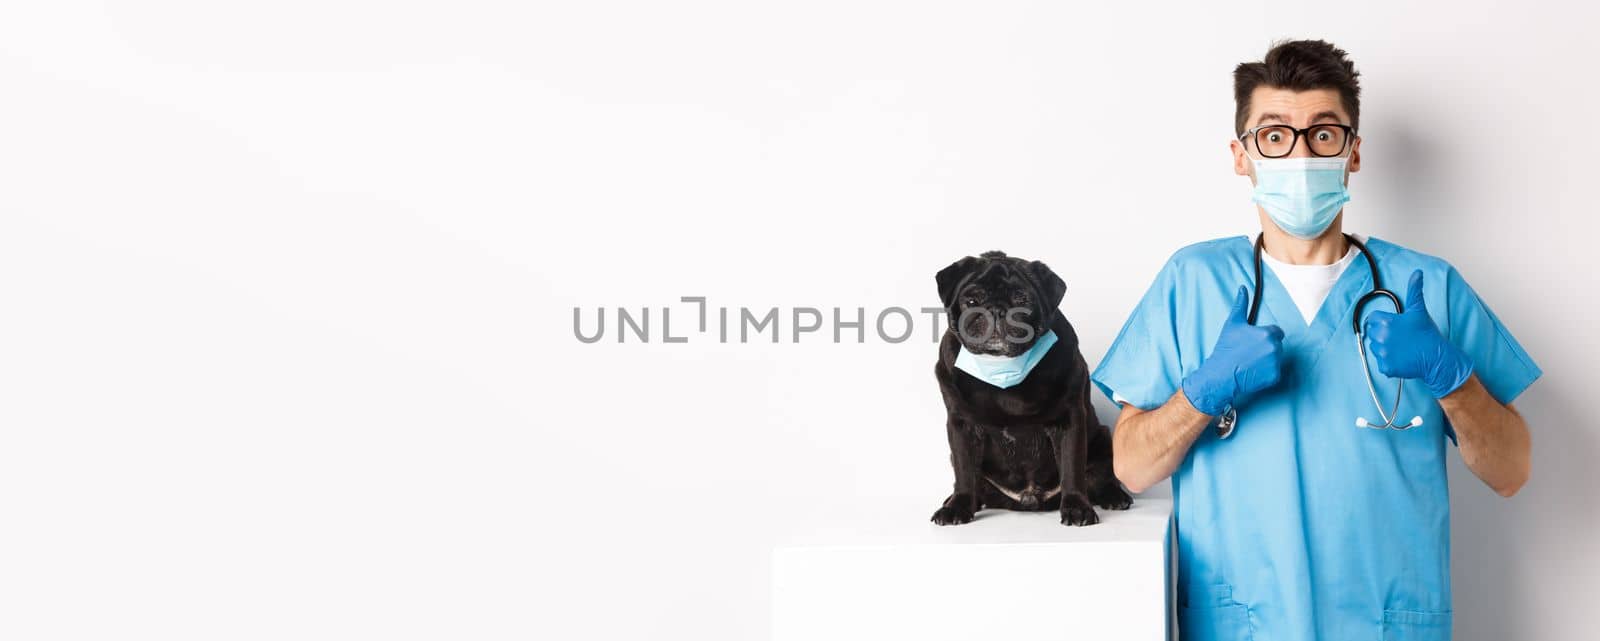 Funny black pug dog wearing medical mask, sitting near handsome veterinarian doctor showing thumbs-up, white background.